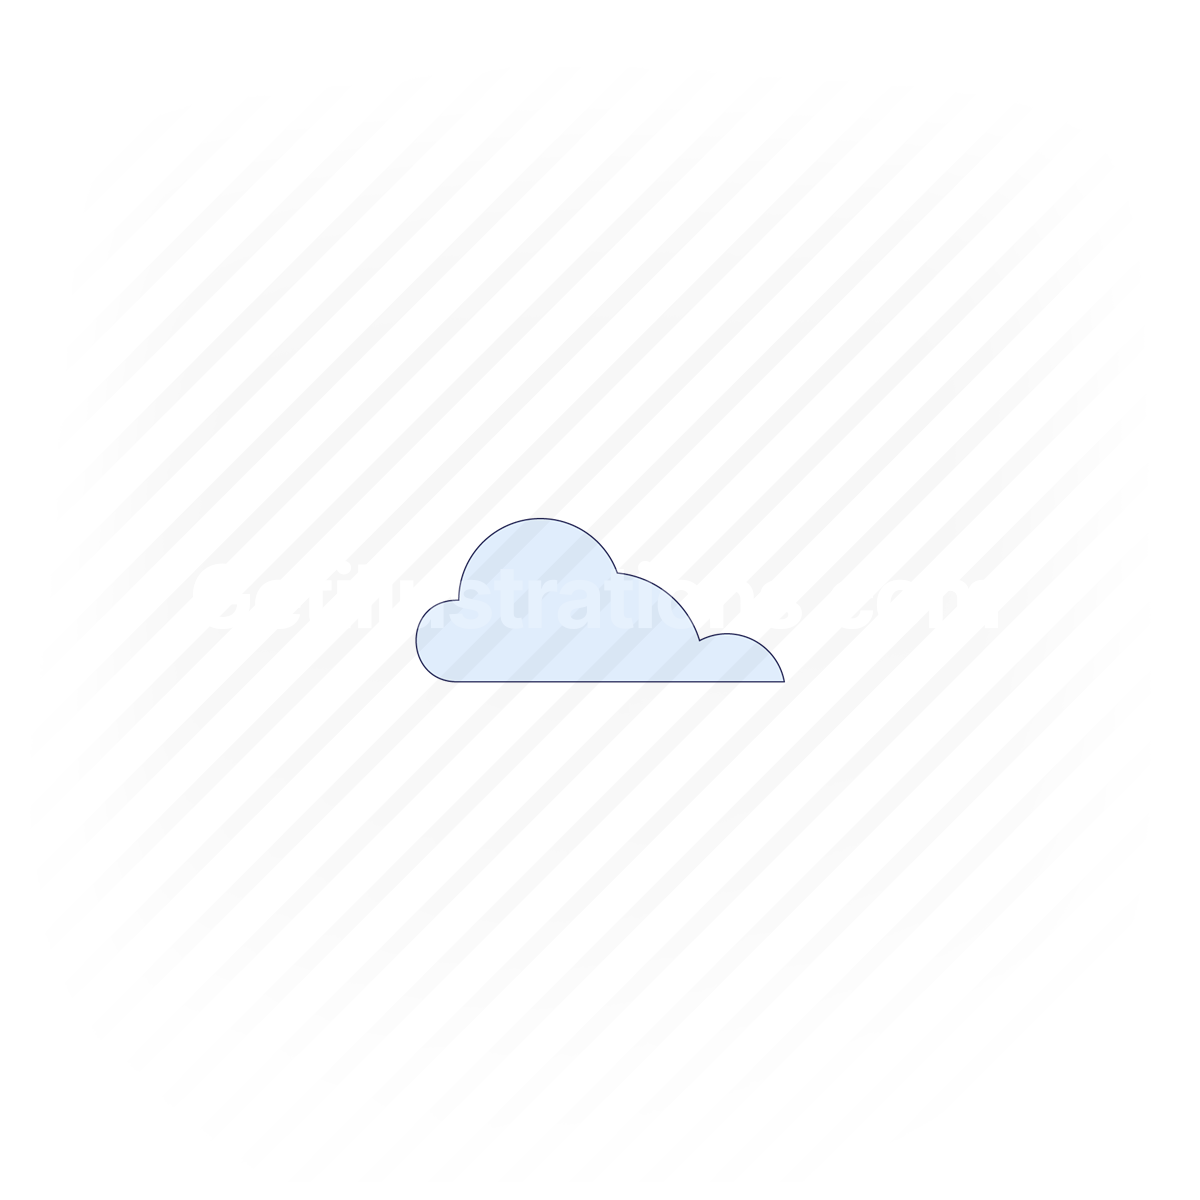 cloud, weather, forecast, cloudy, storage